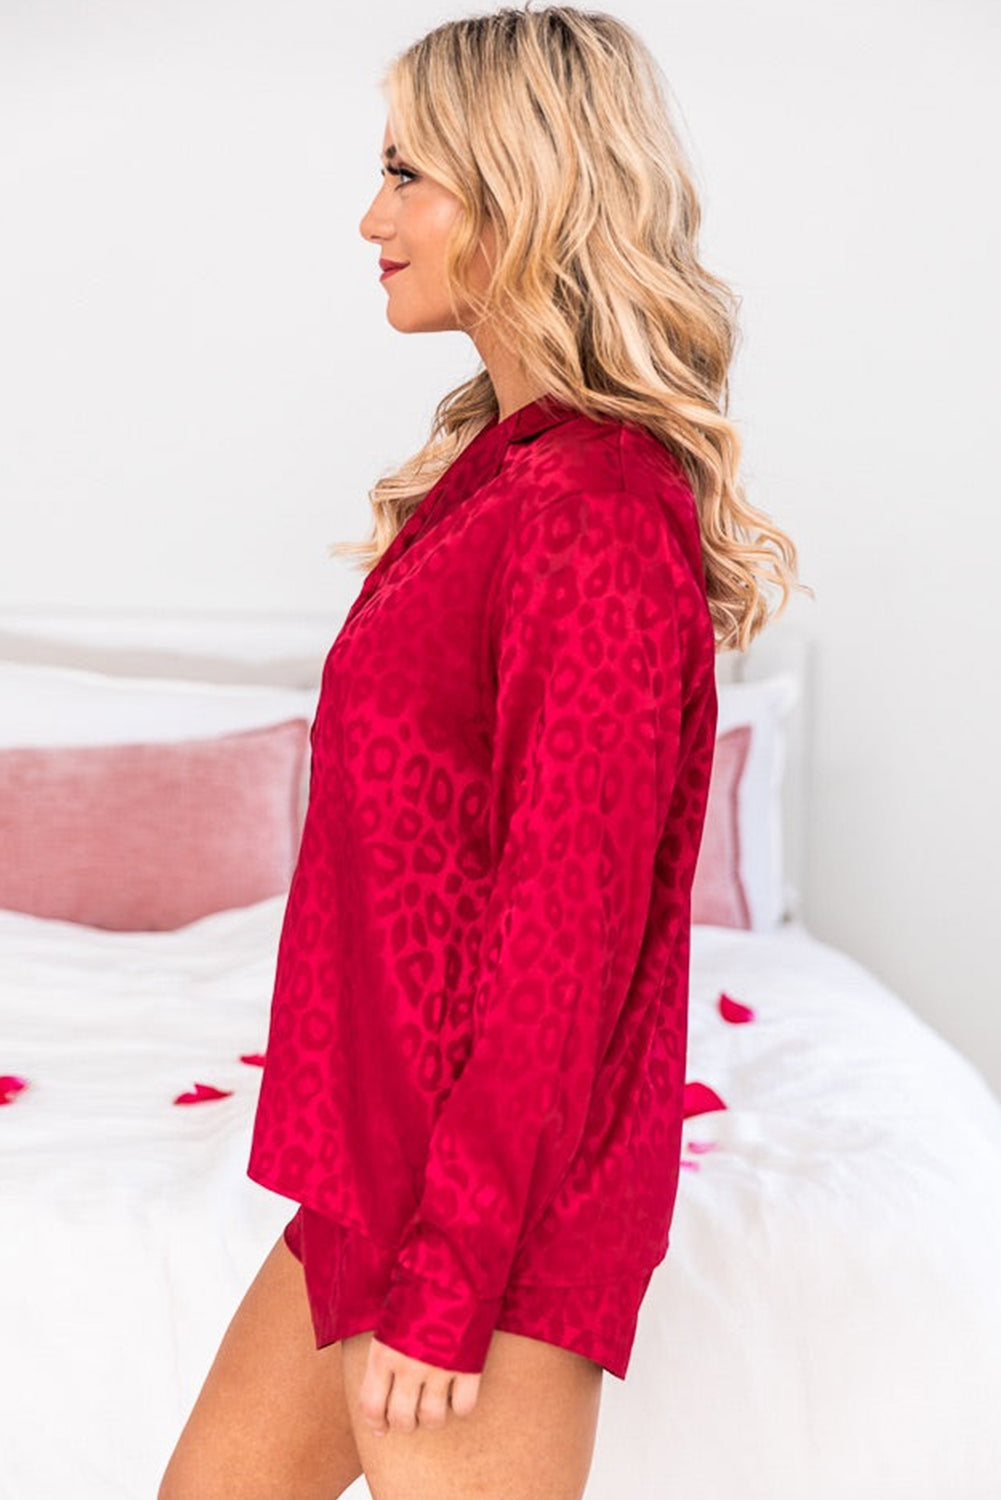 LC15343-3-S, LC15343-3-M, LC15343-3-L, LC15343-3-XL, Red Women's Satin Leopard Long Sleeve Top and Shorts 2 Piece Lounge Set